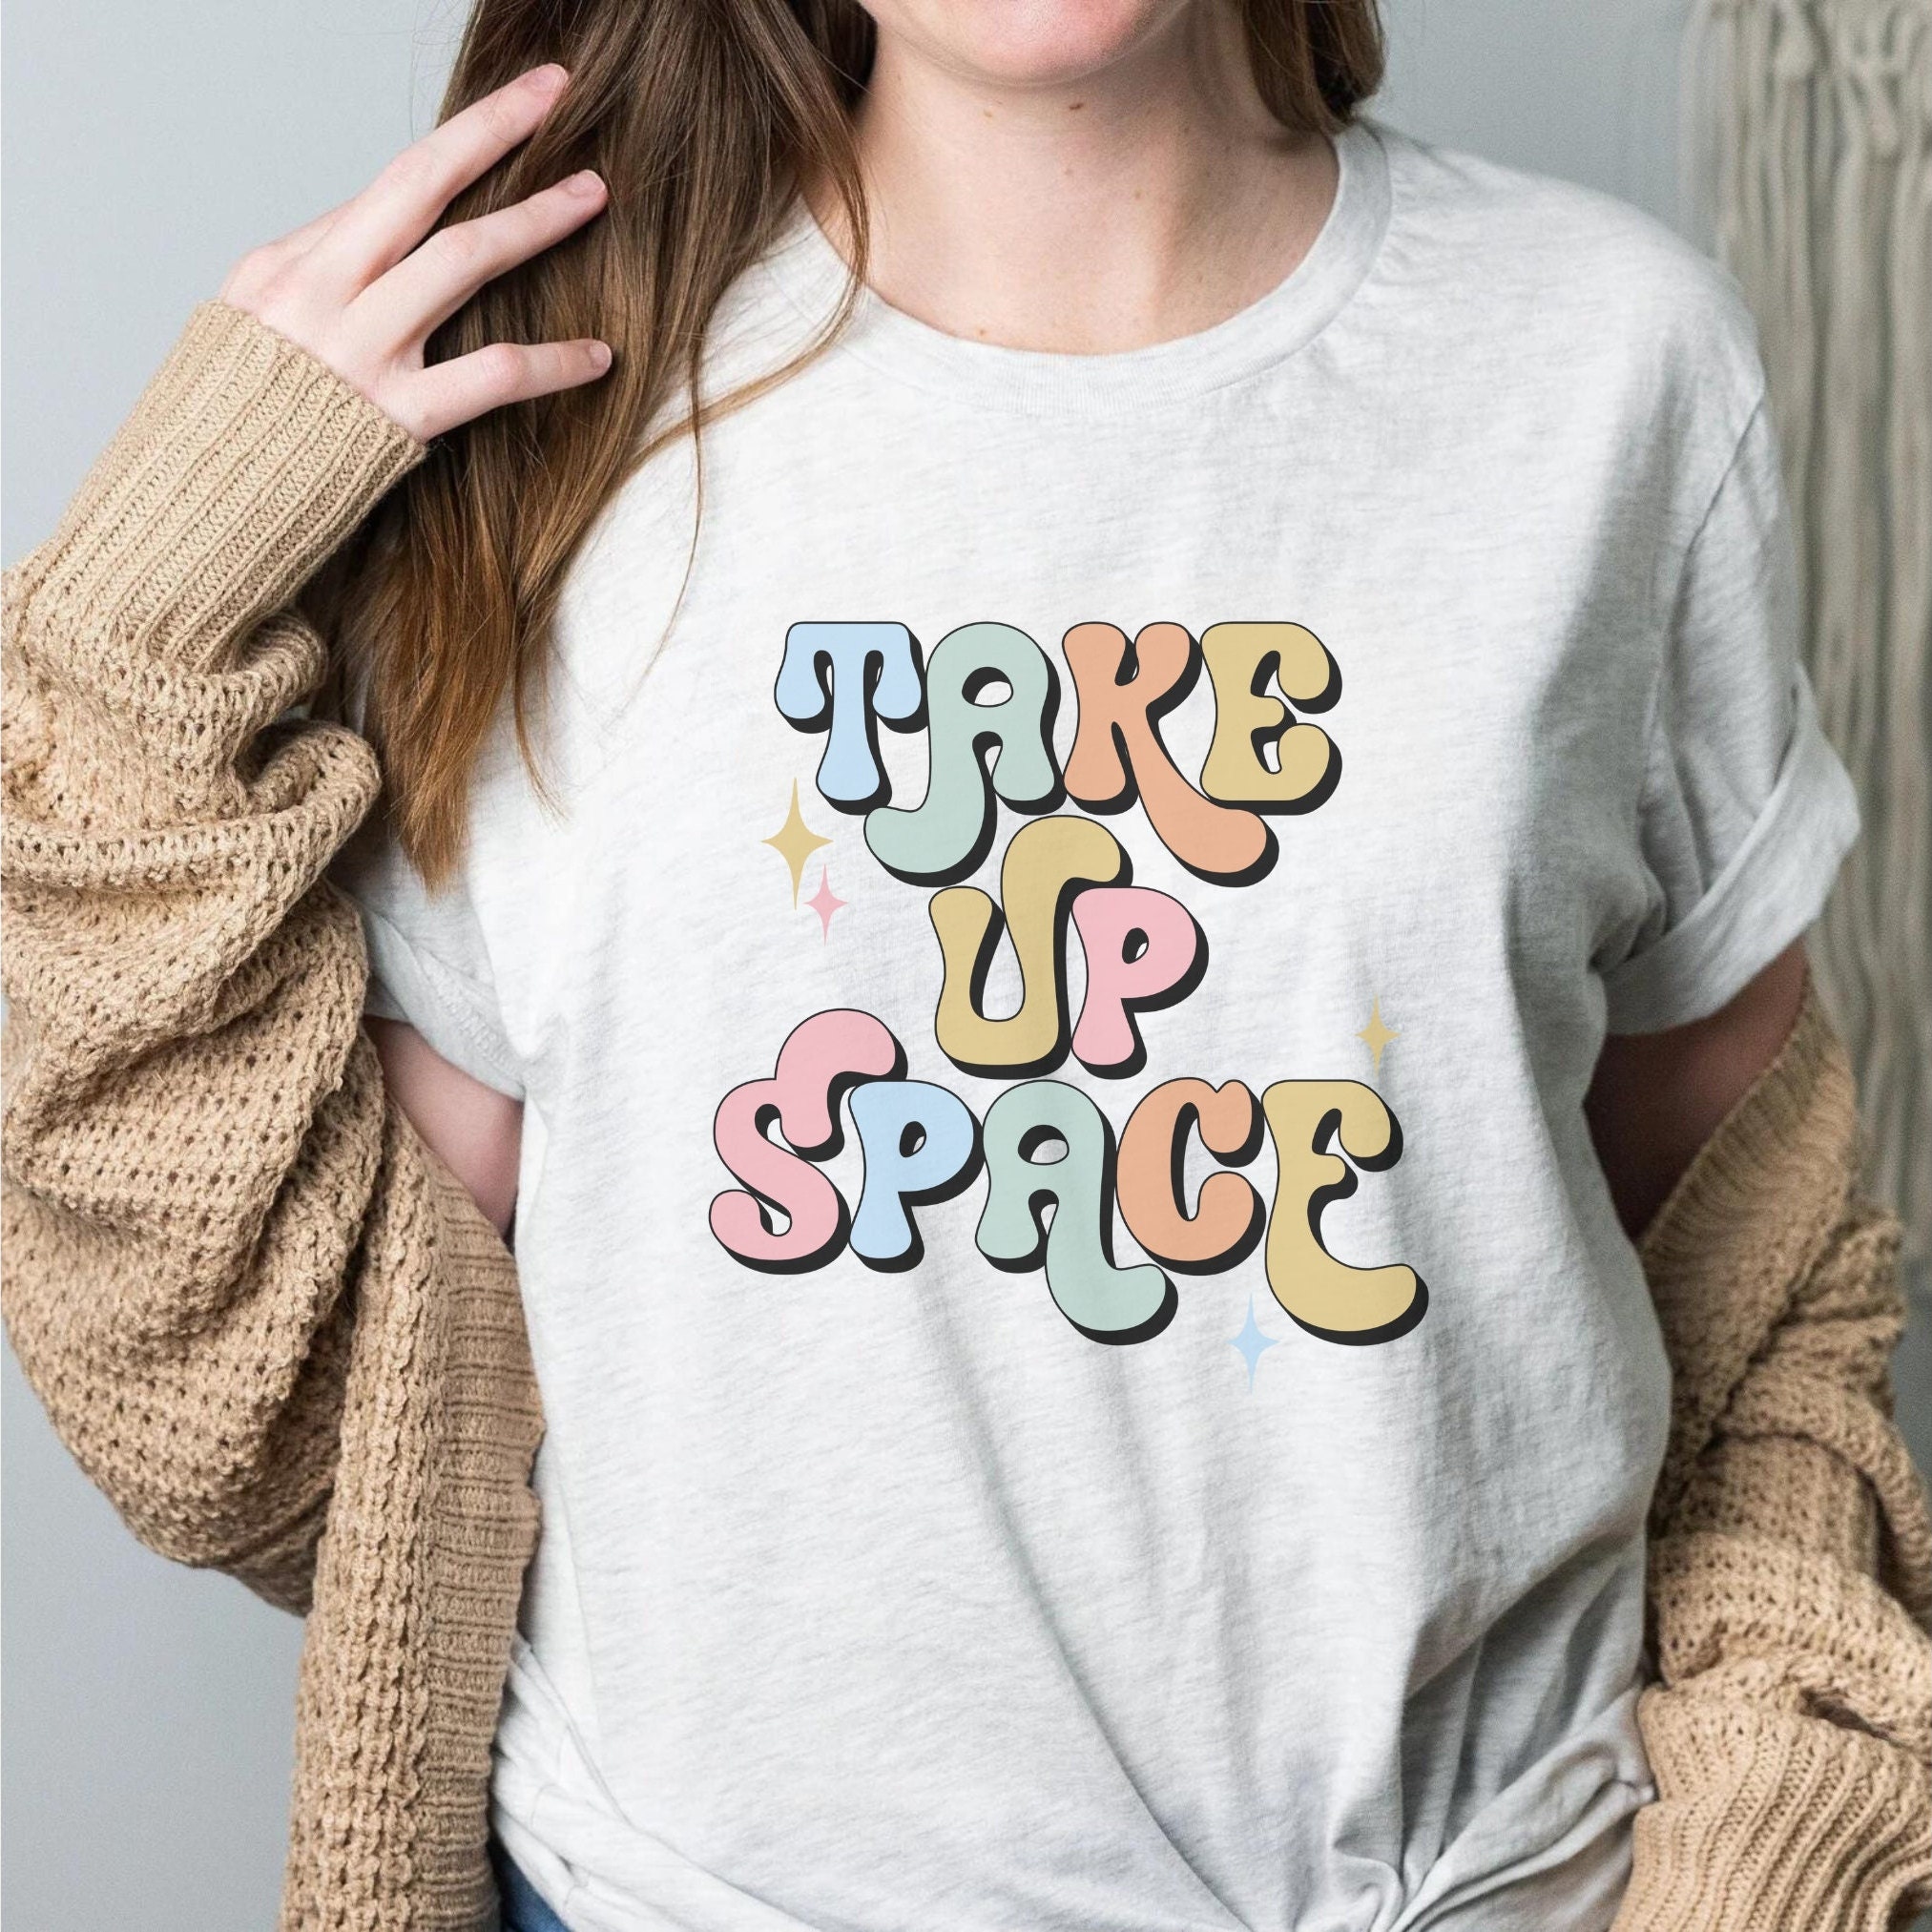 staying consistent, taking up space & loving myself >>> shirt